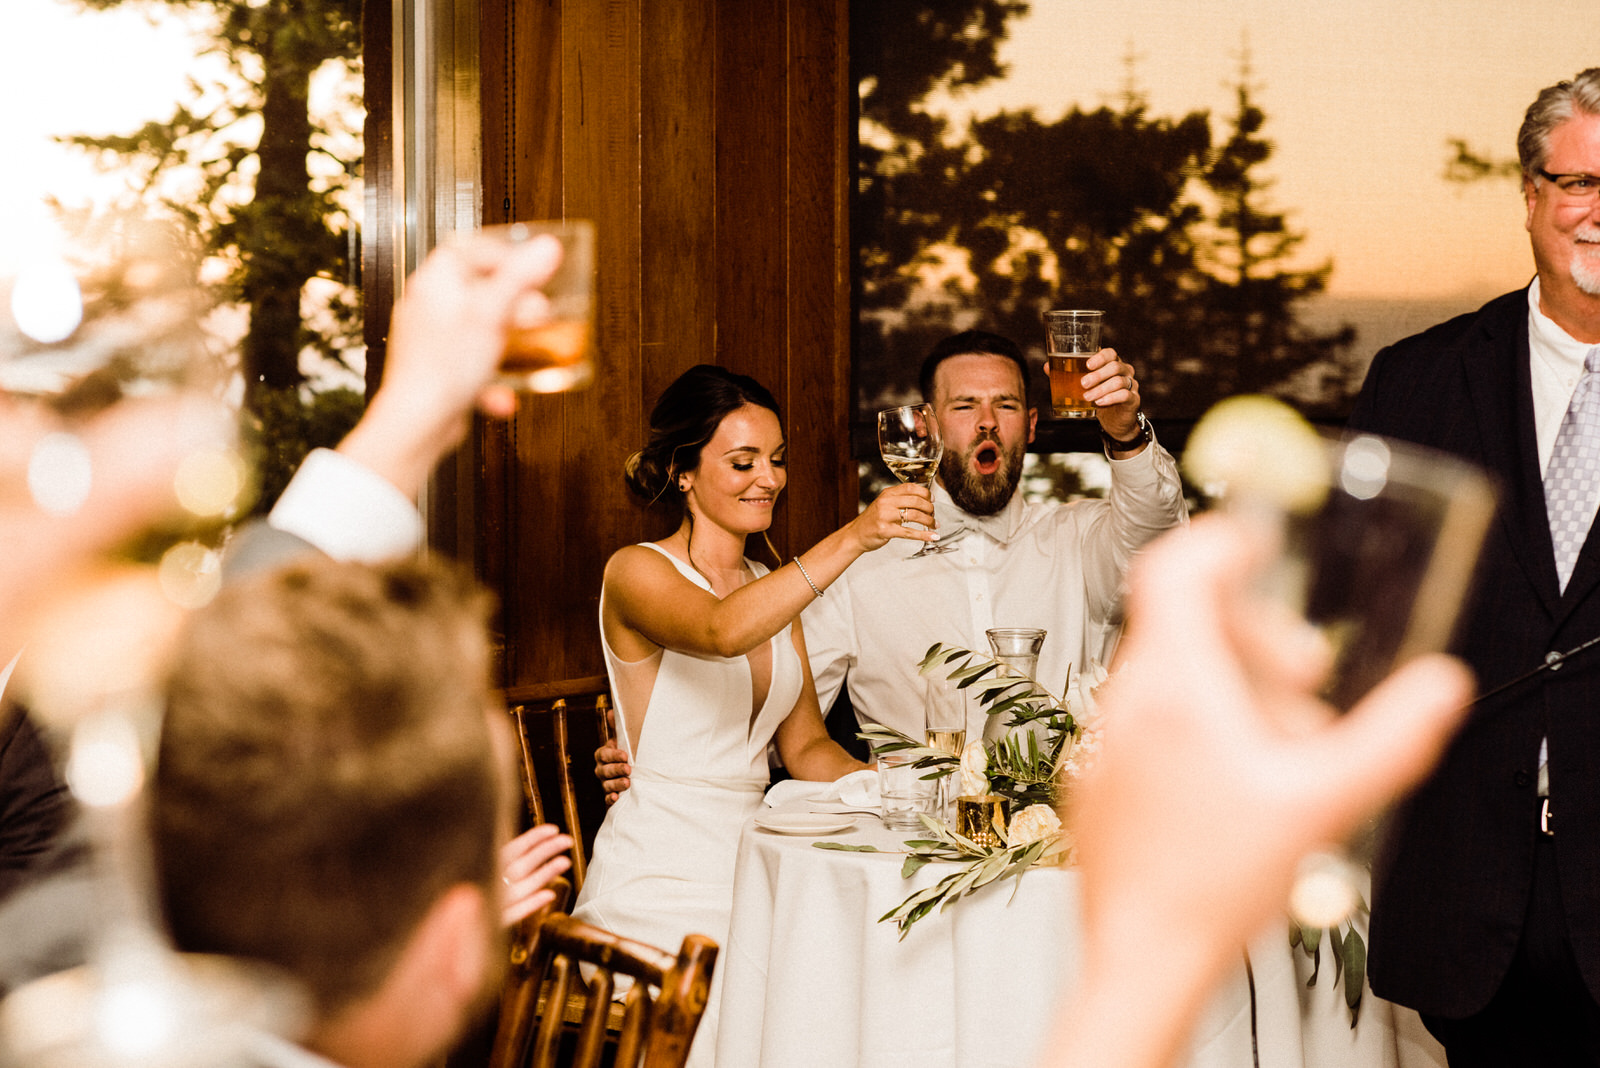 Champagne Toast in South Lake Tahoe Wedding Venue Lakeview Lodge 